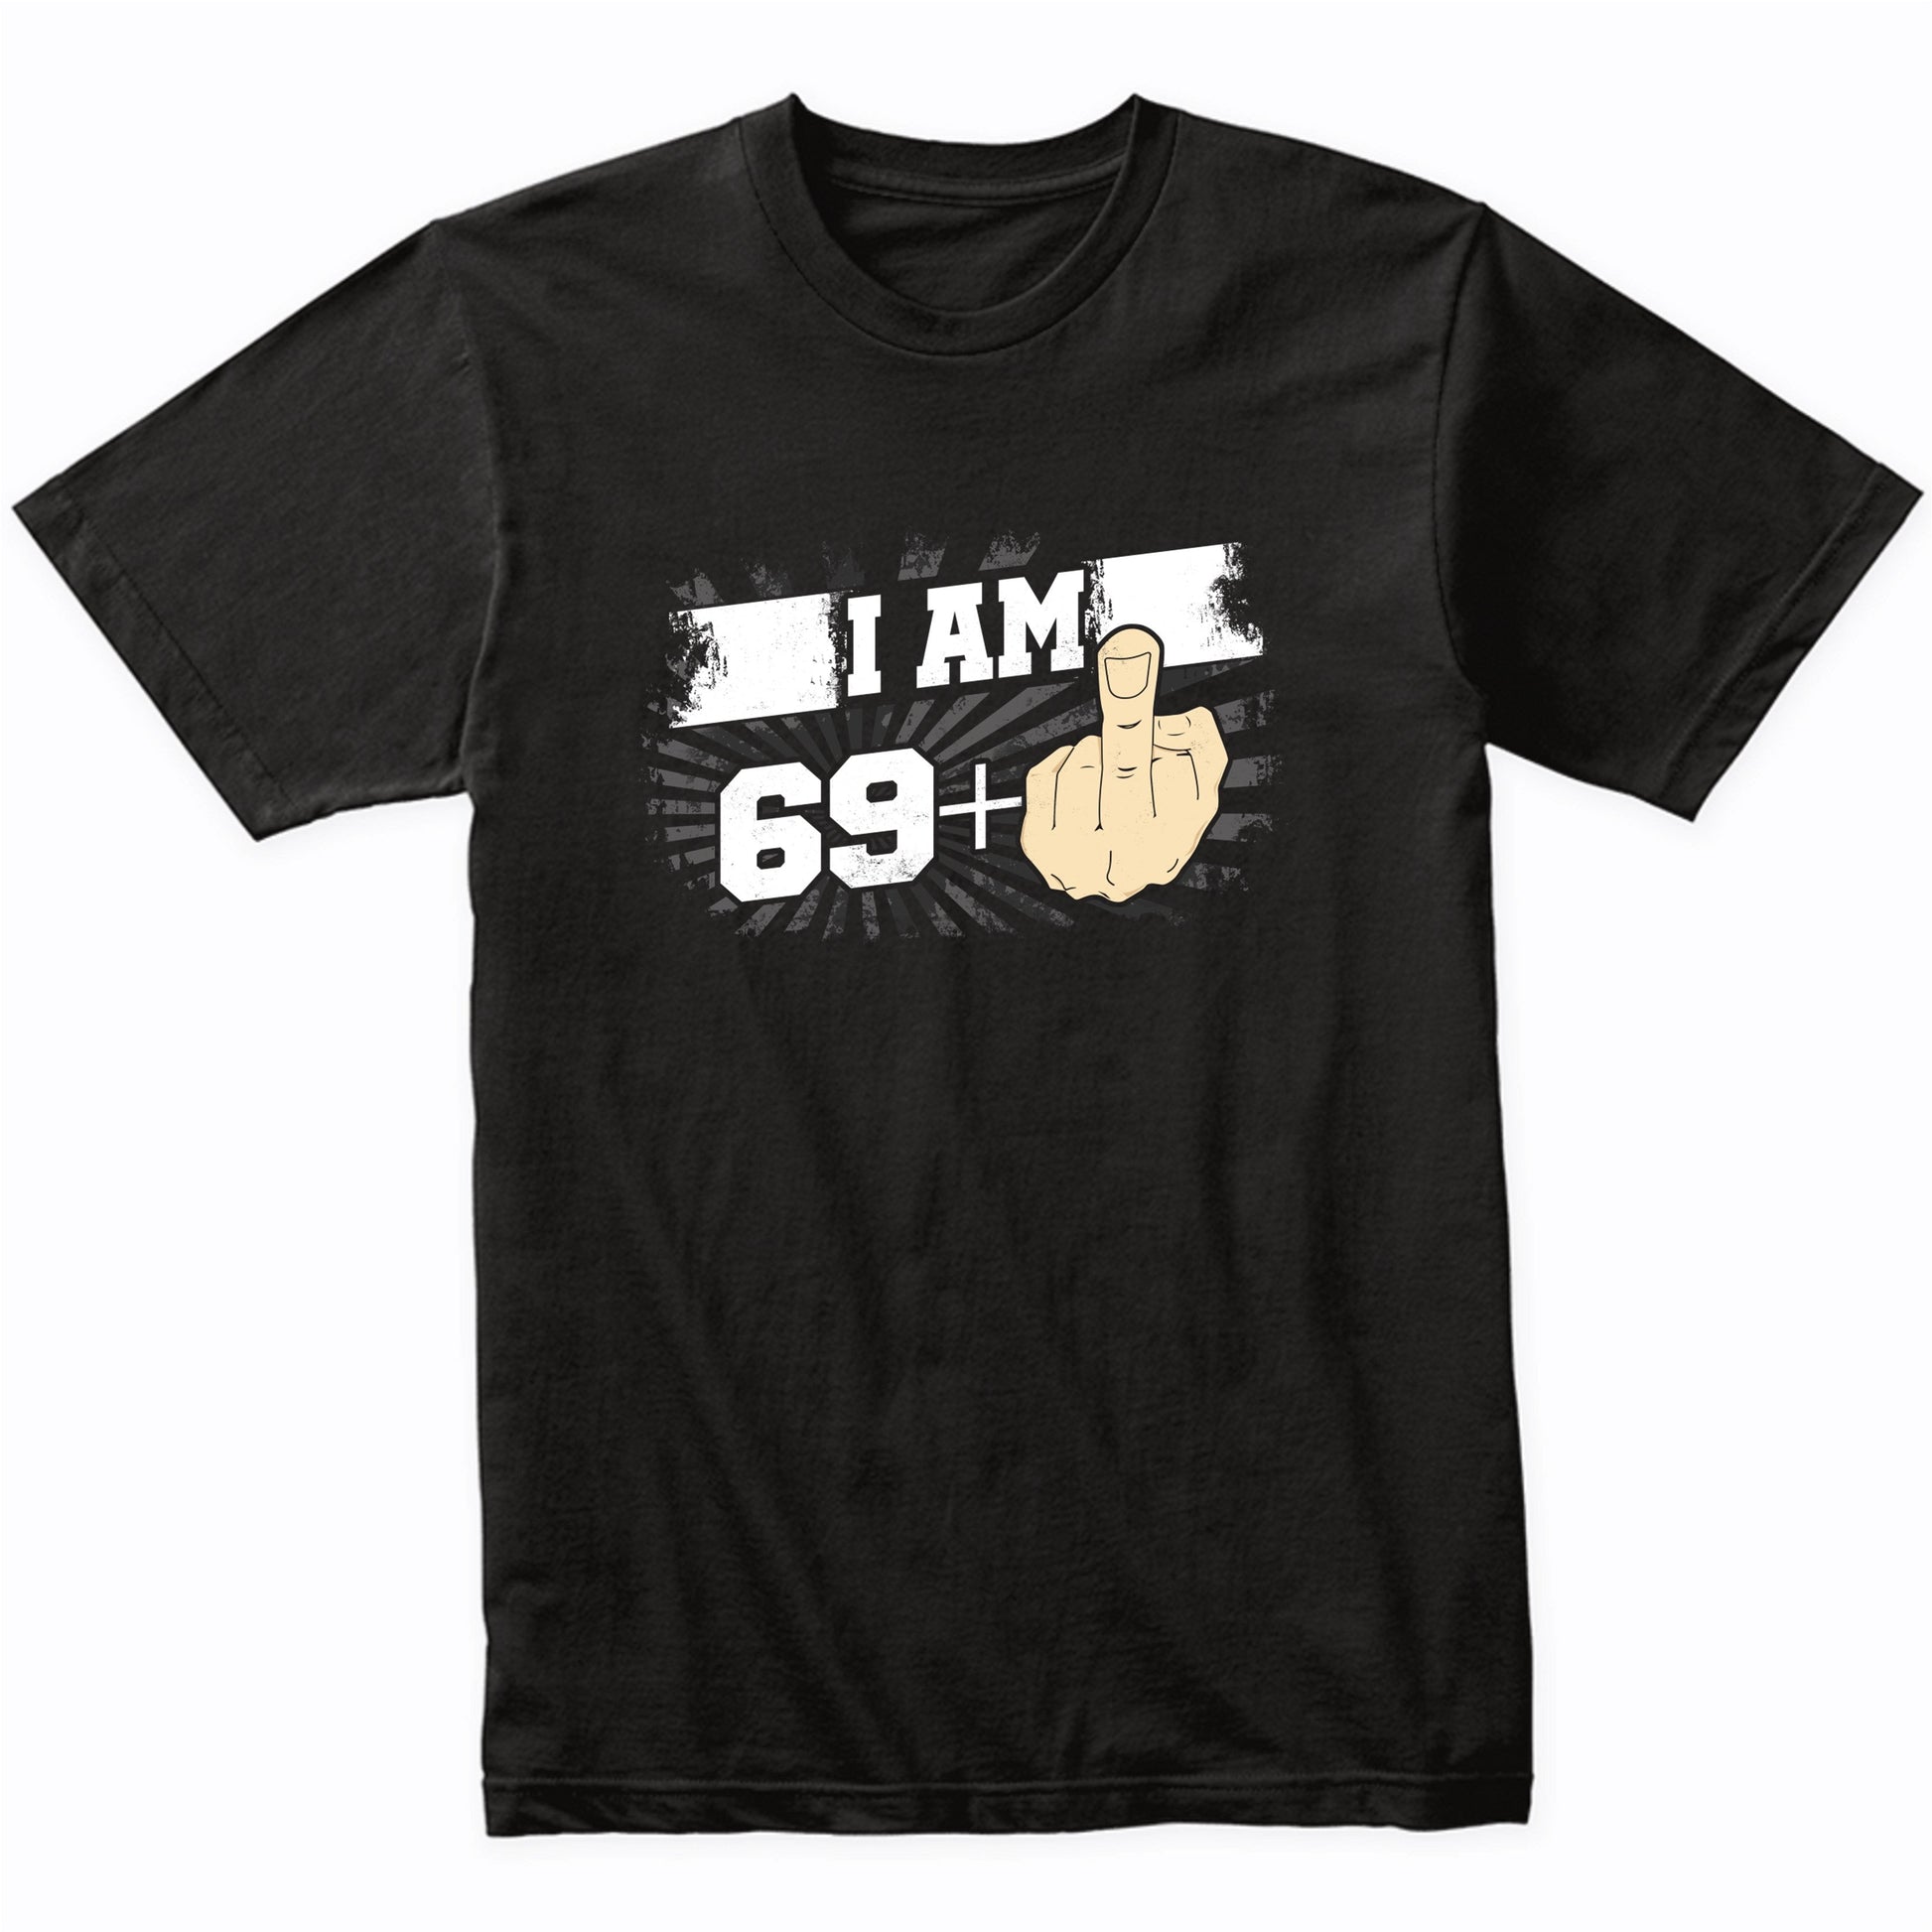 70th Birthday Shirt For Men - I Am 69 Plus Middle Finger 70 Years Old T-Shirt